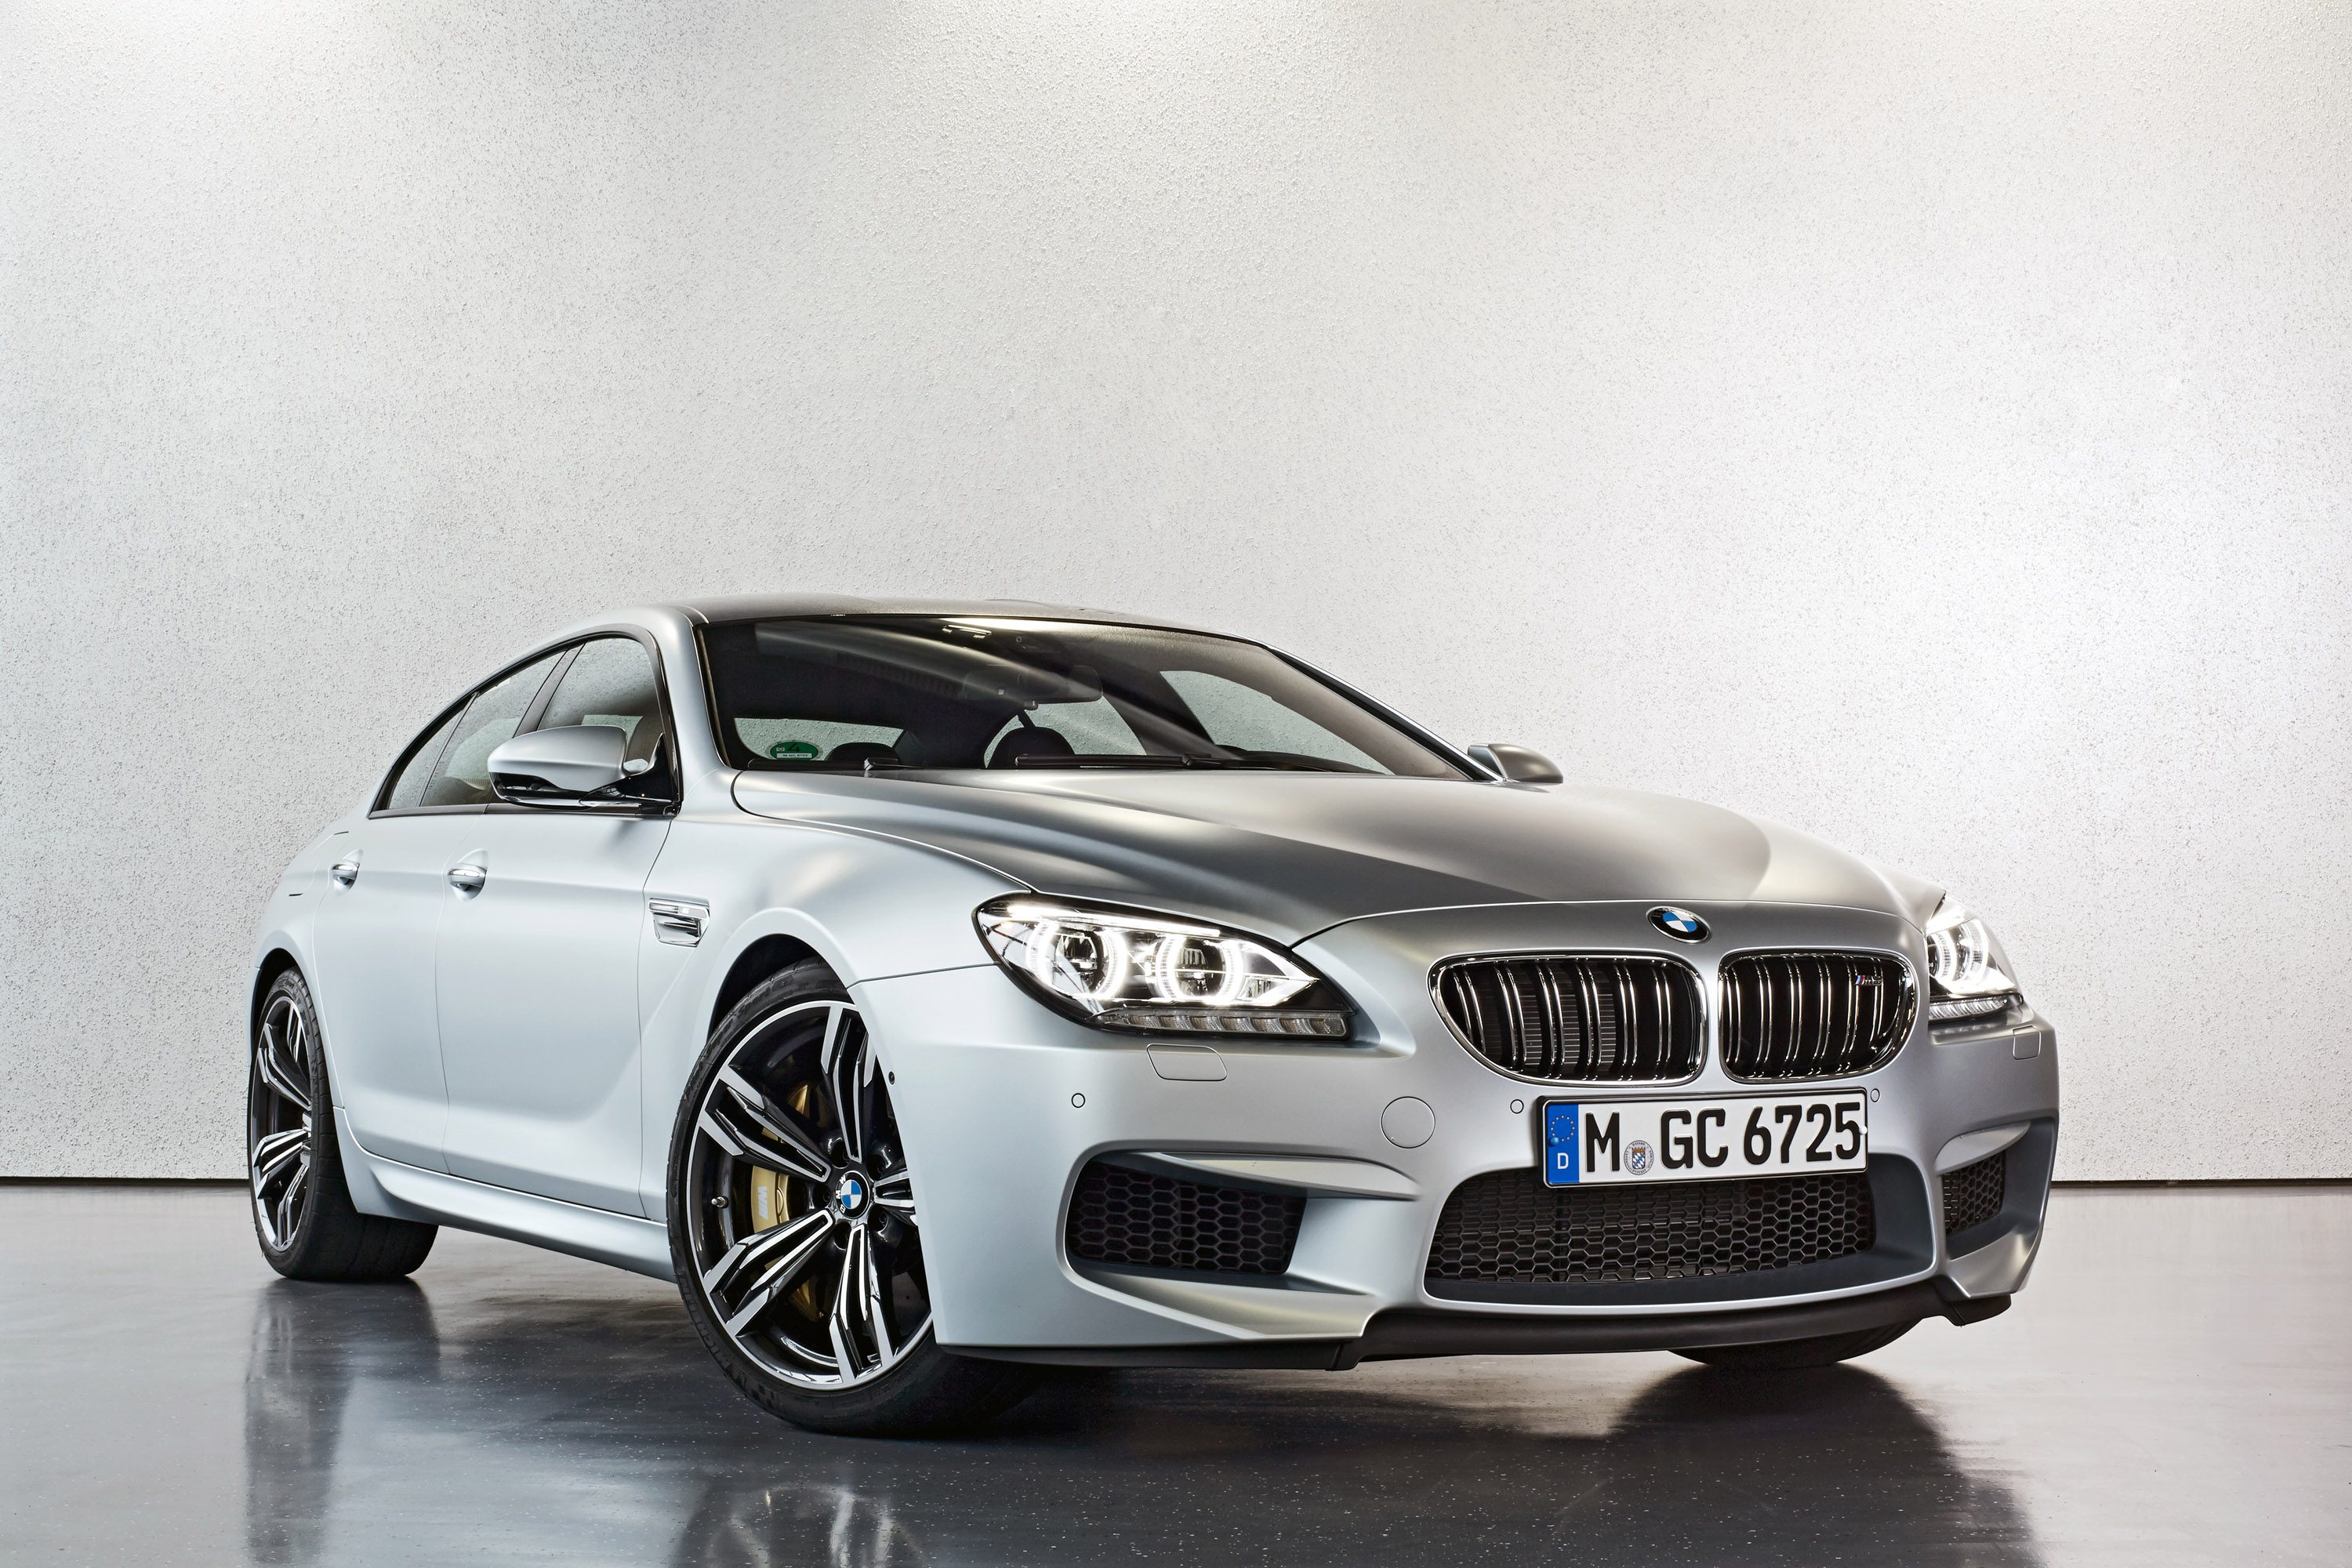 2014 BMW M6 Gran Coupe HD Pictures